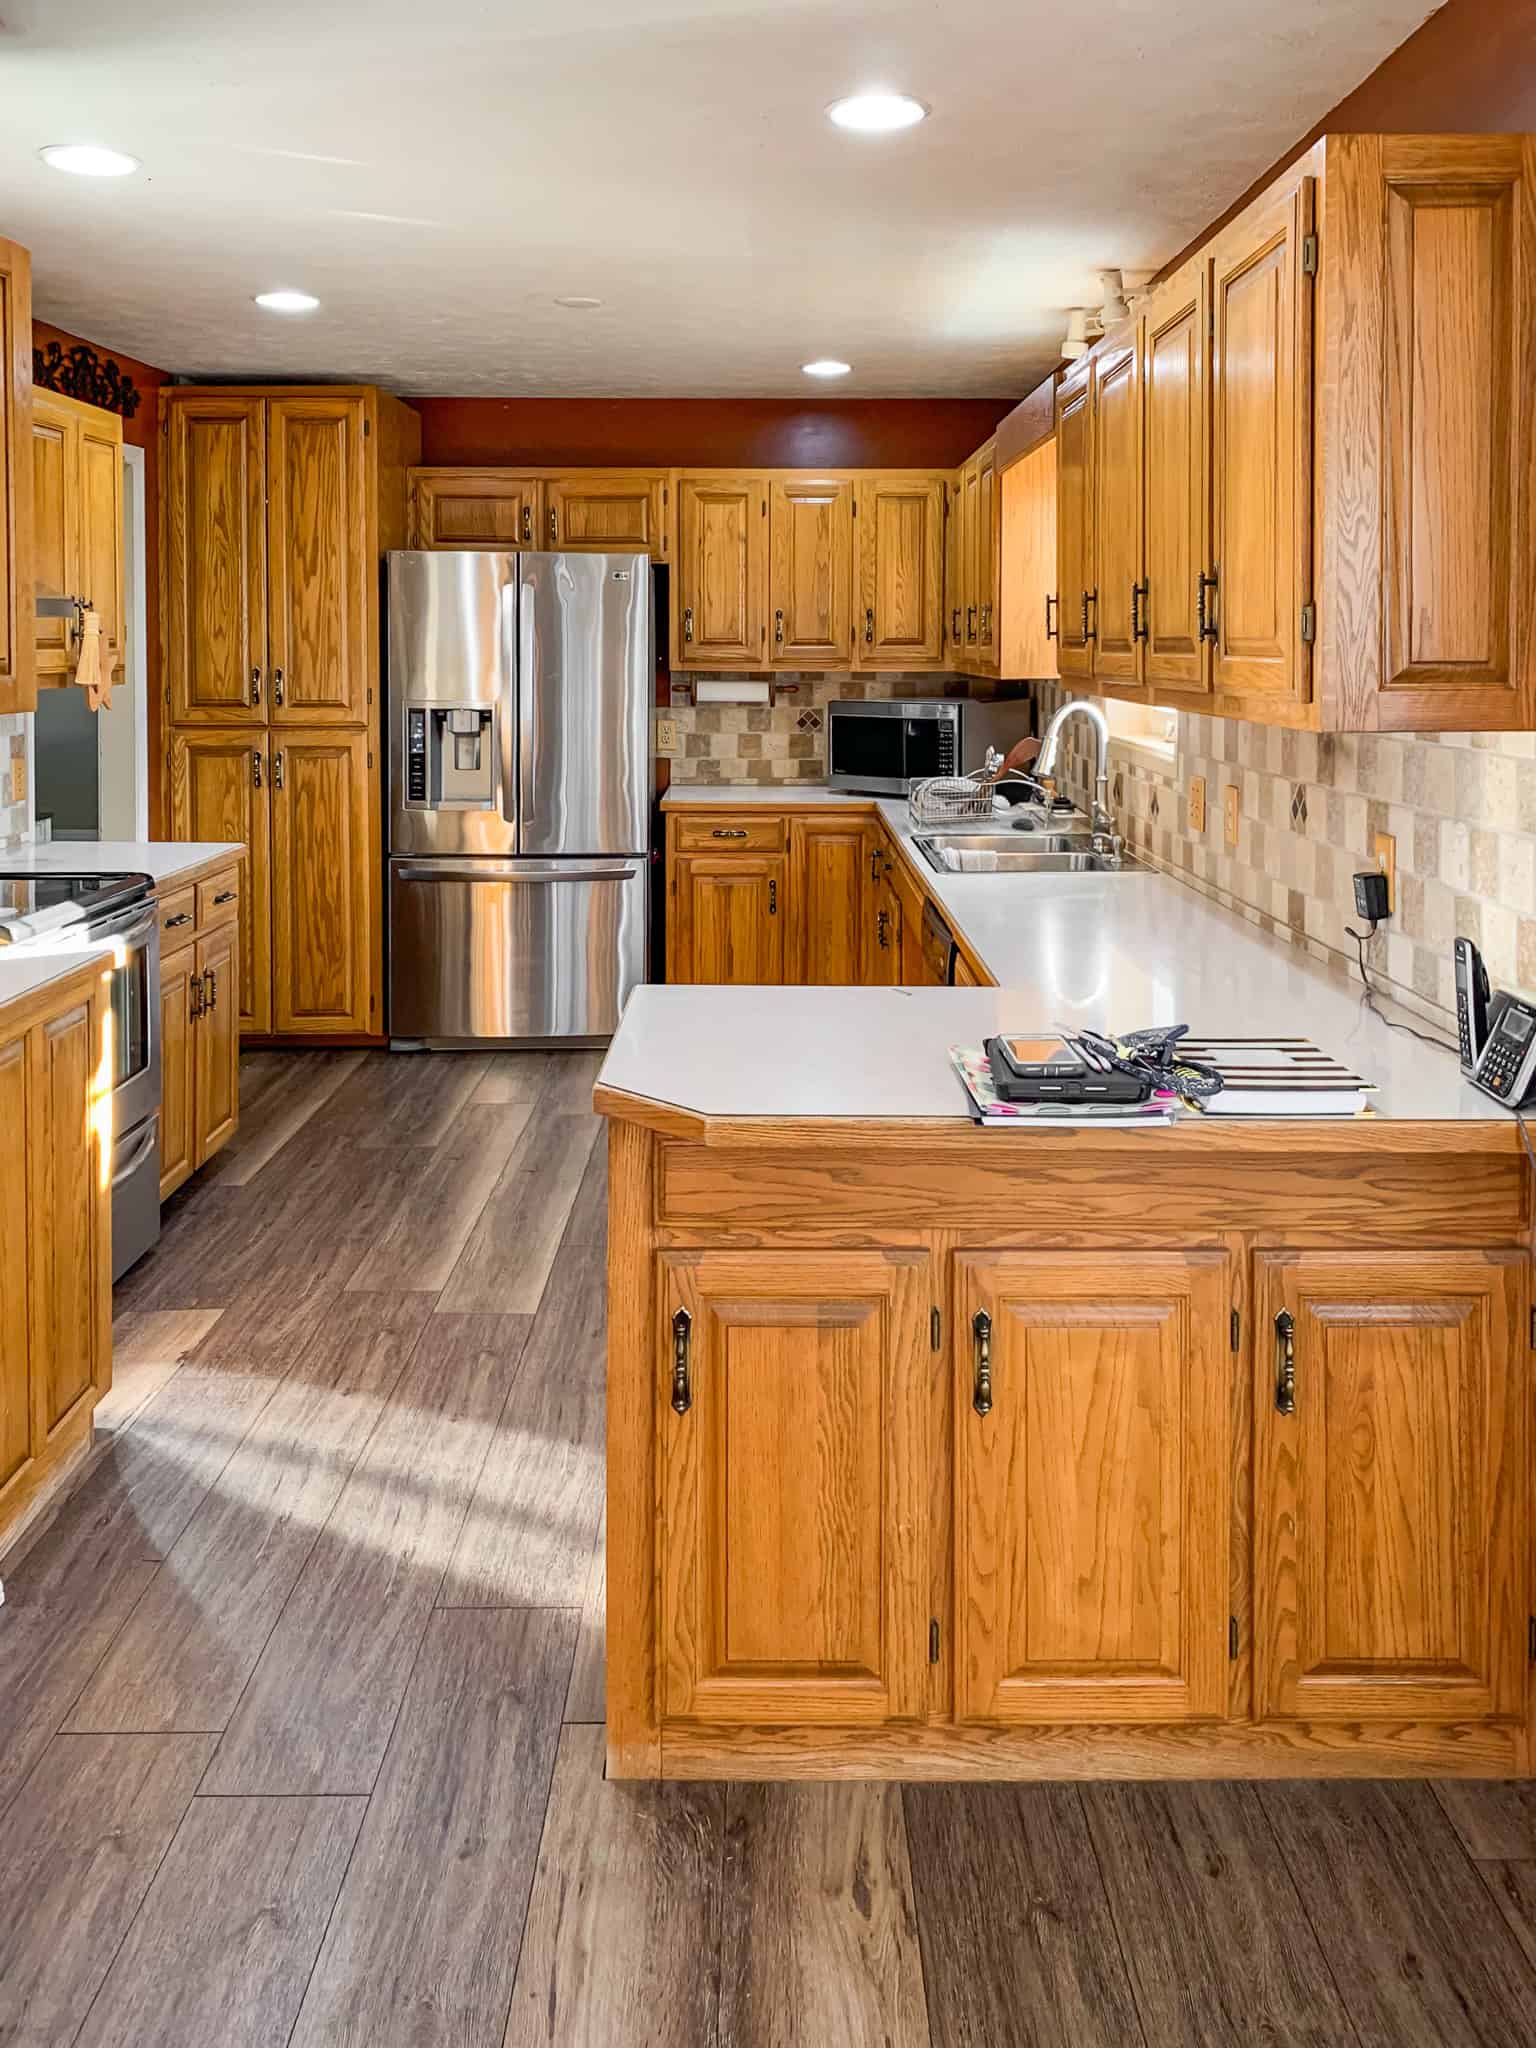 What Color Wood Flooring Goes With Light Oak Cabinets – Flooring Tips